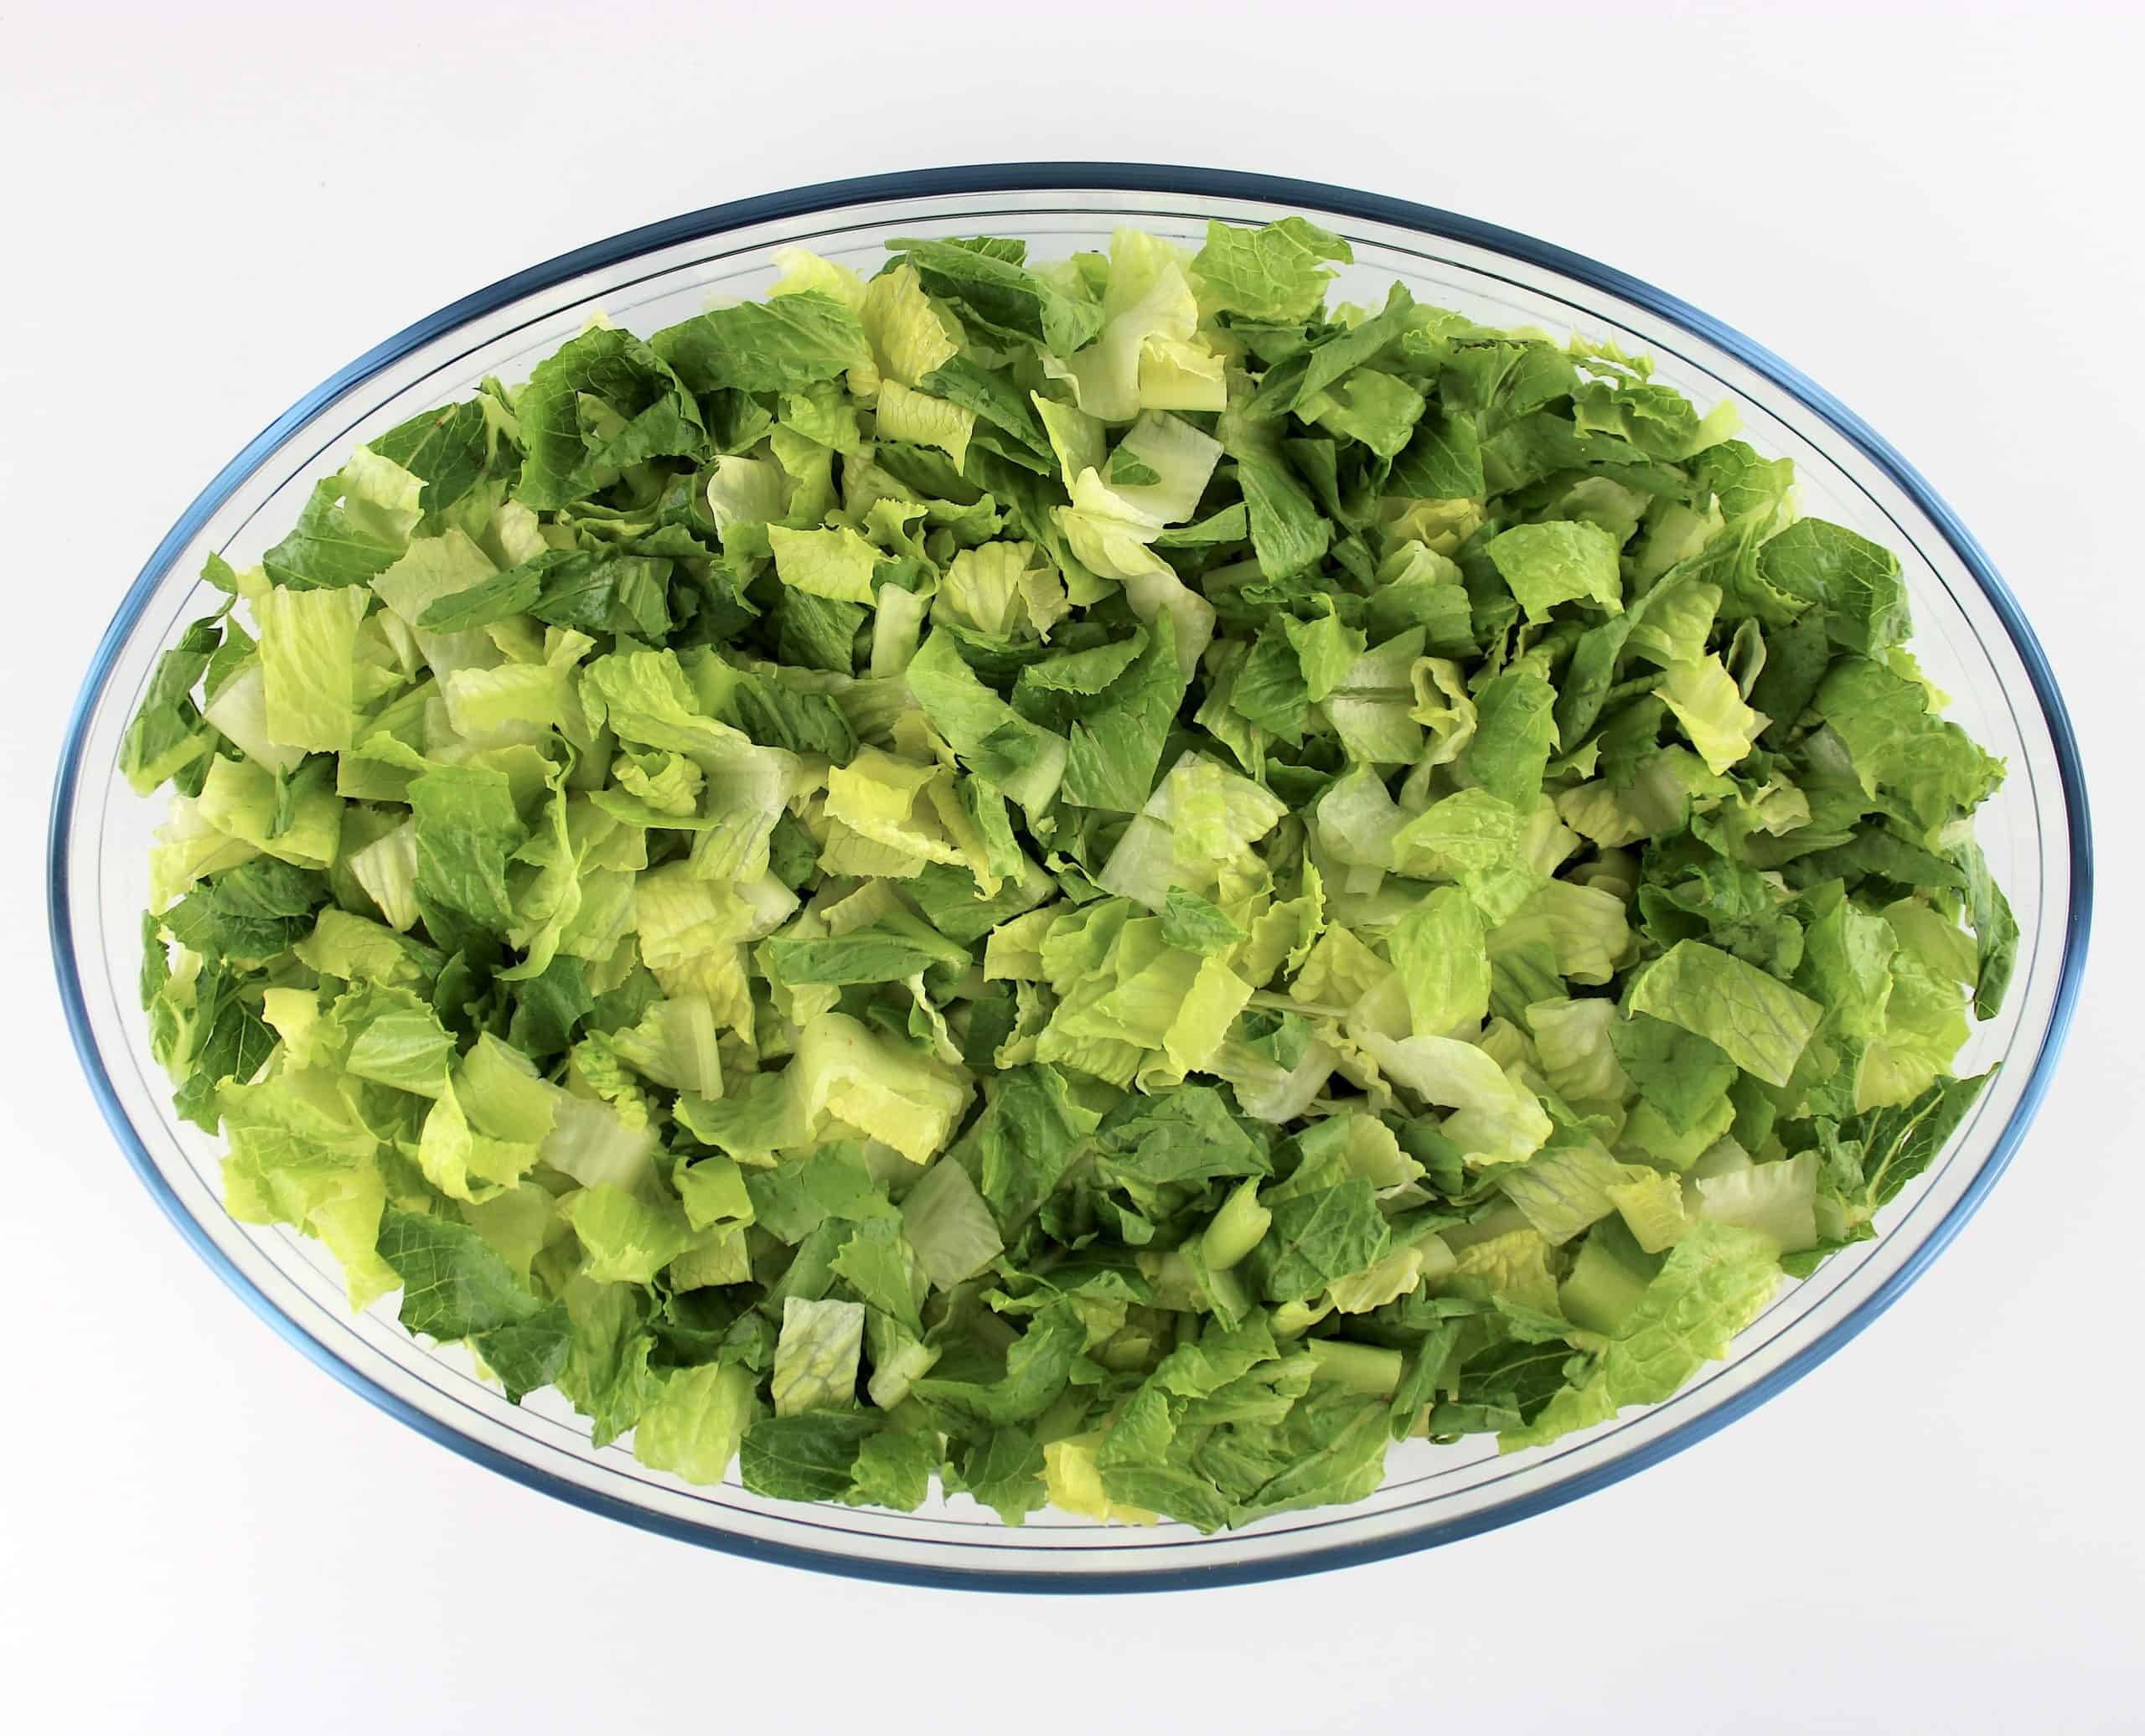 chopped romaine lettuce in oval glass bowl